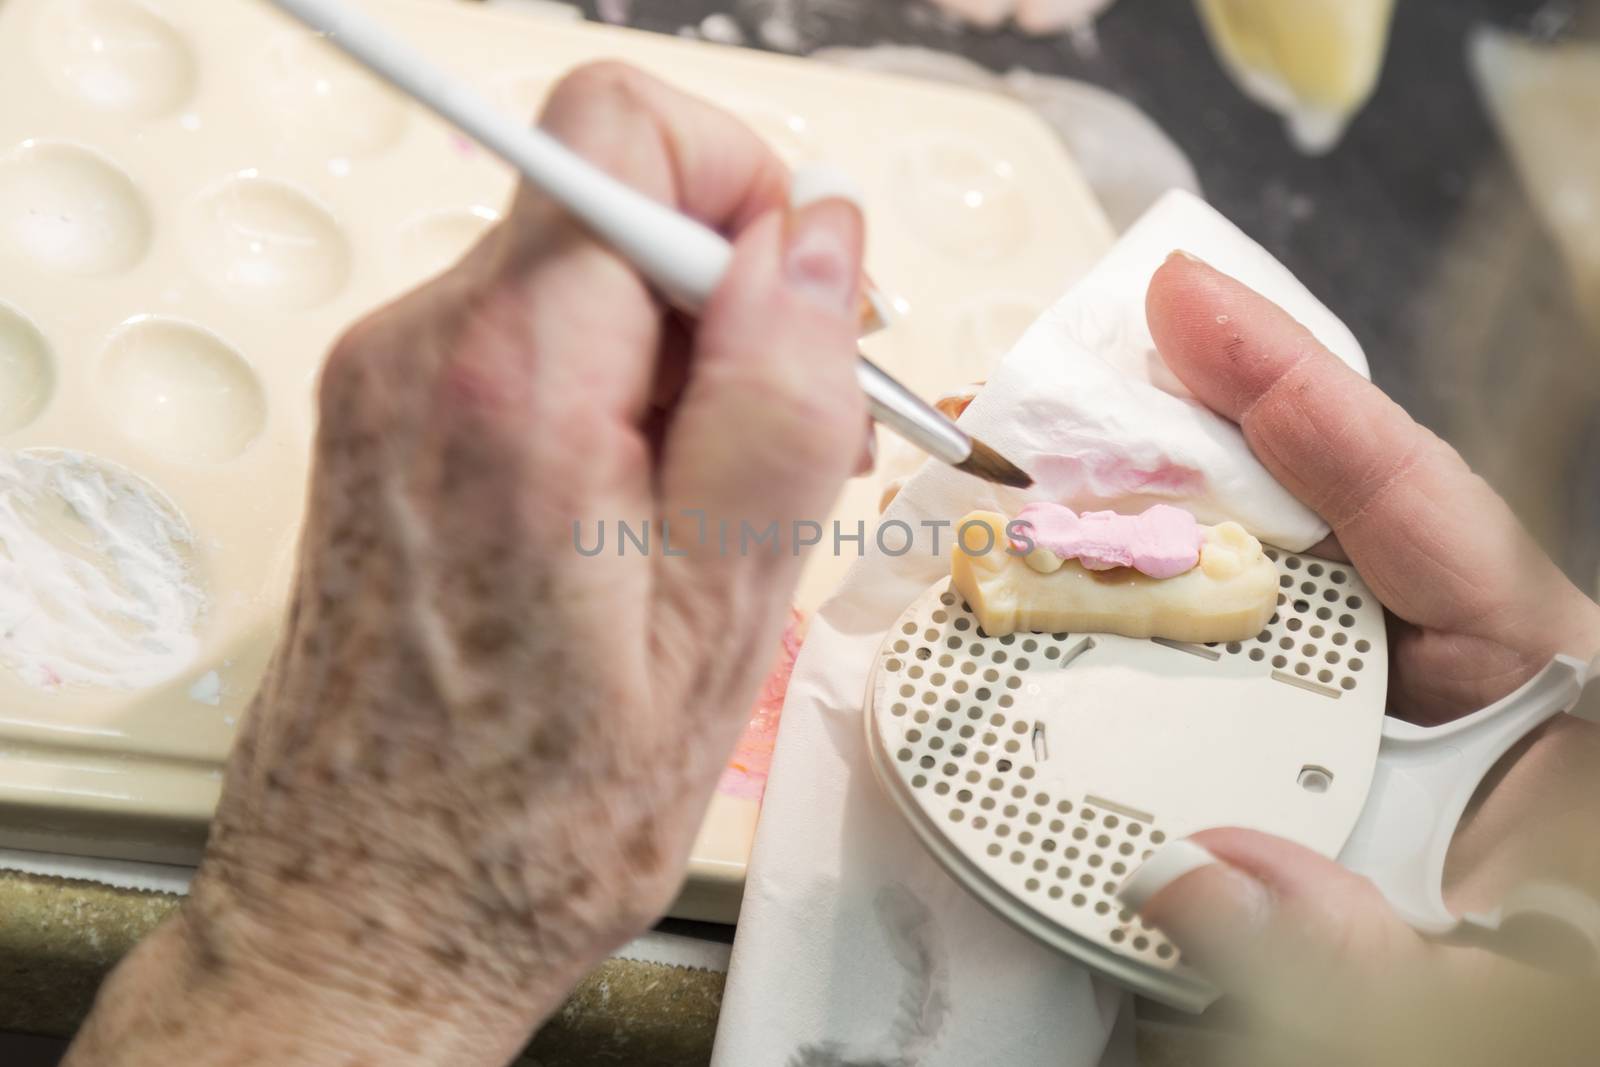 Female Dental Technician Applying Porcelain To A 3D Printed Implant Mold In The Lab.